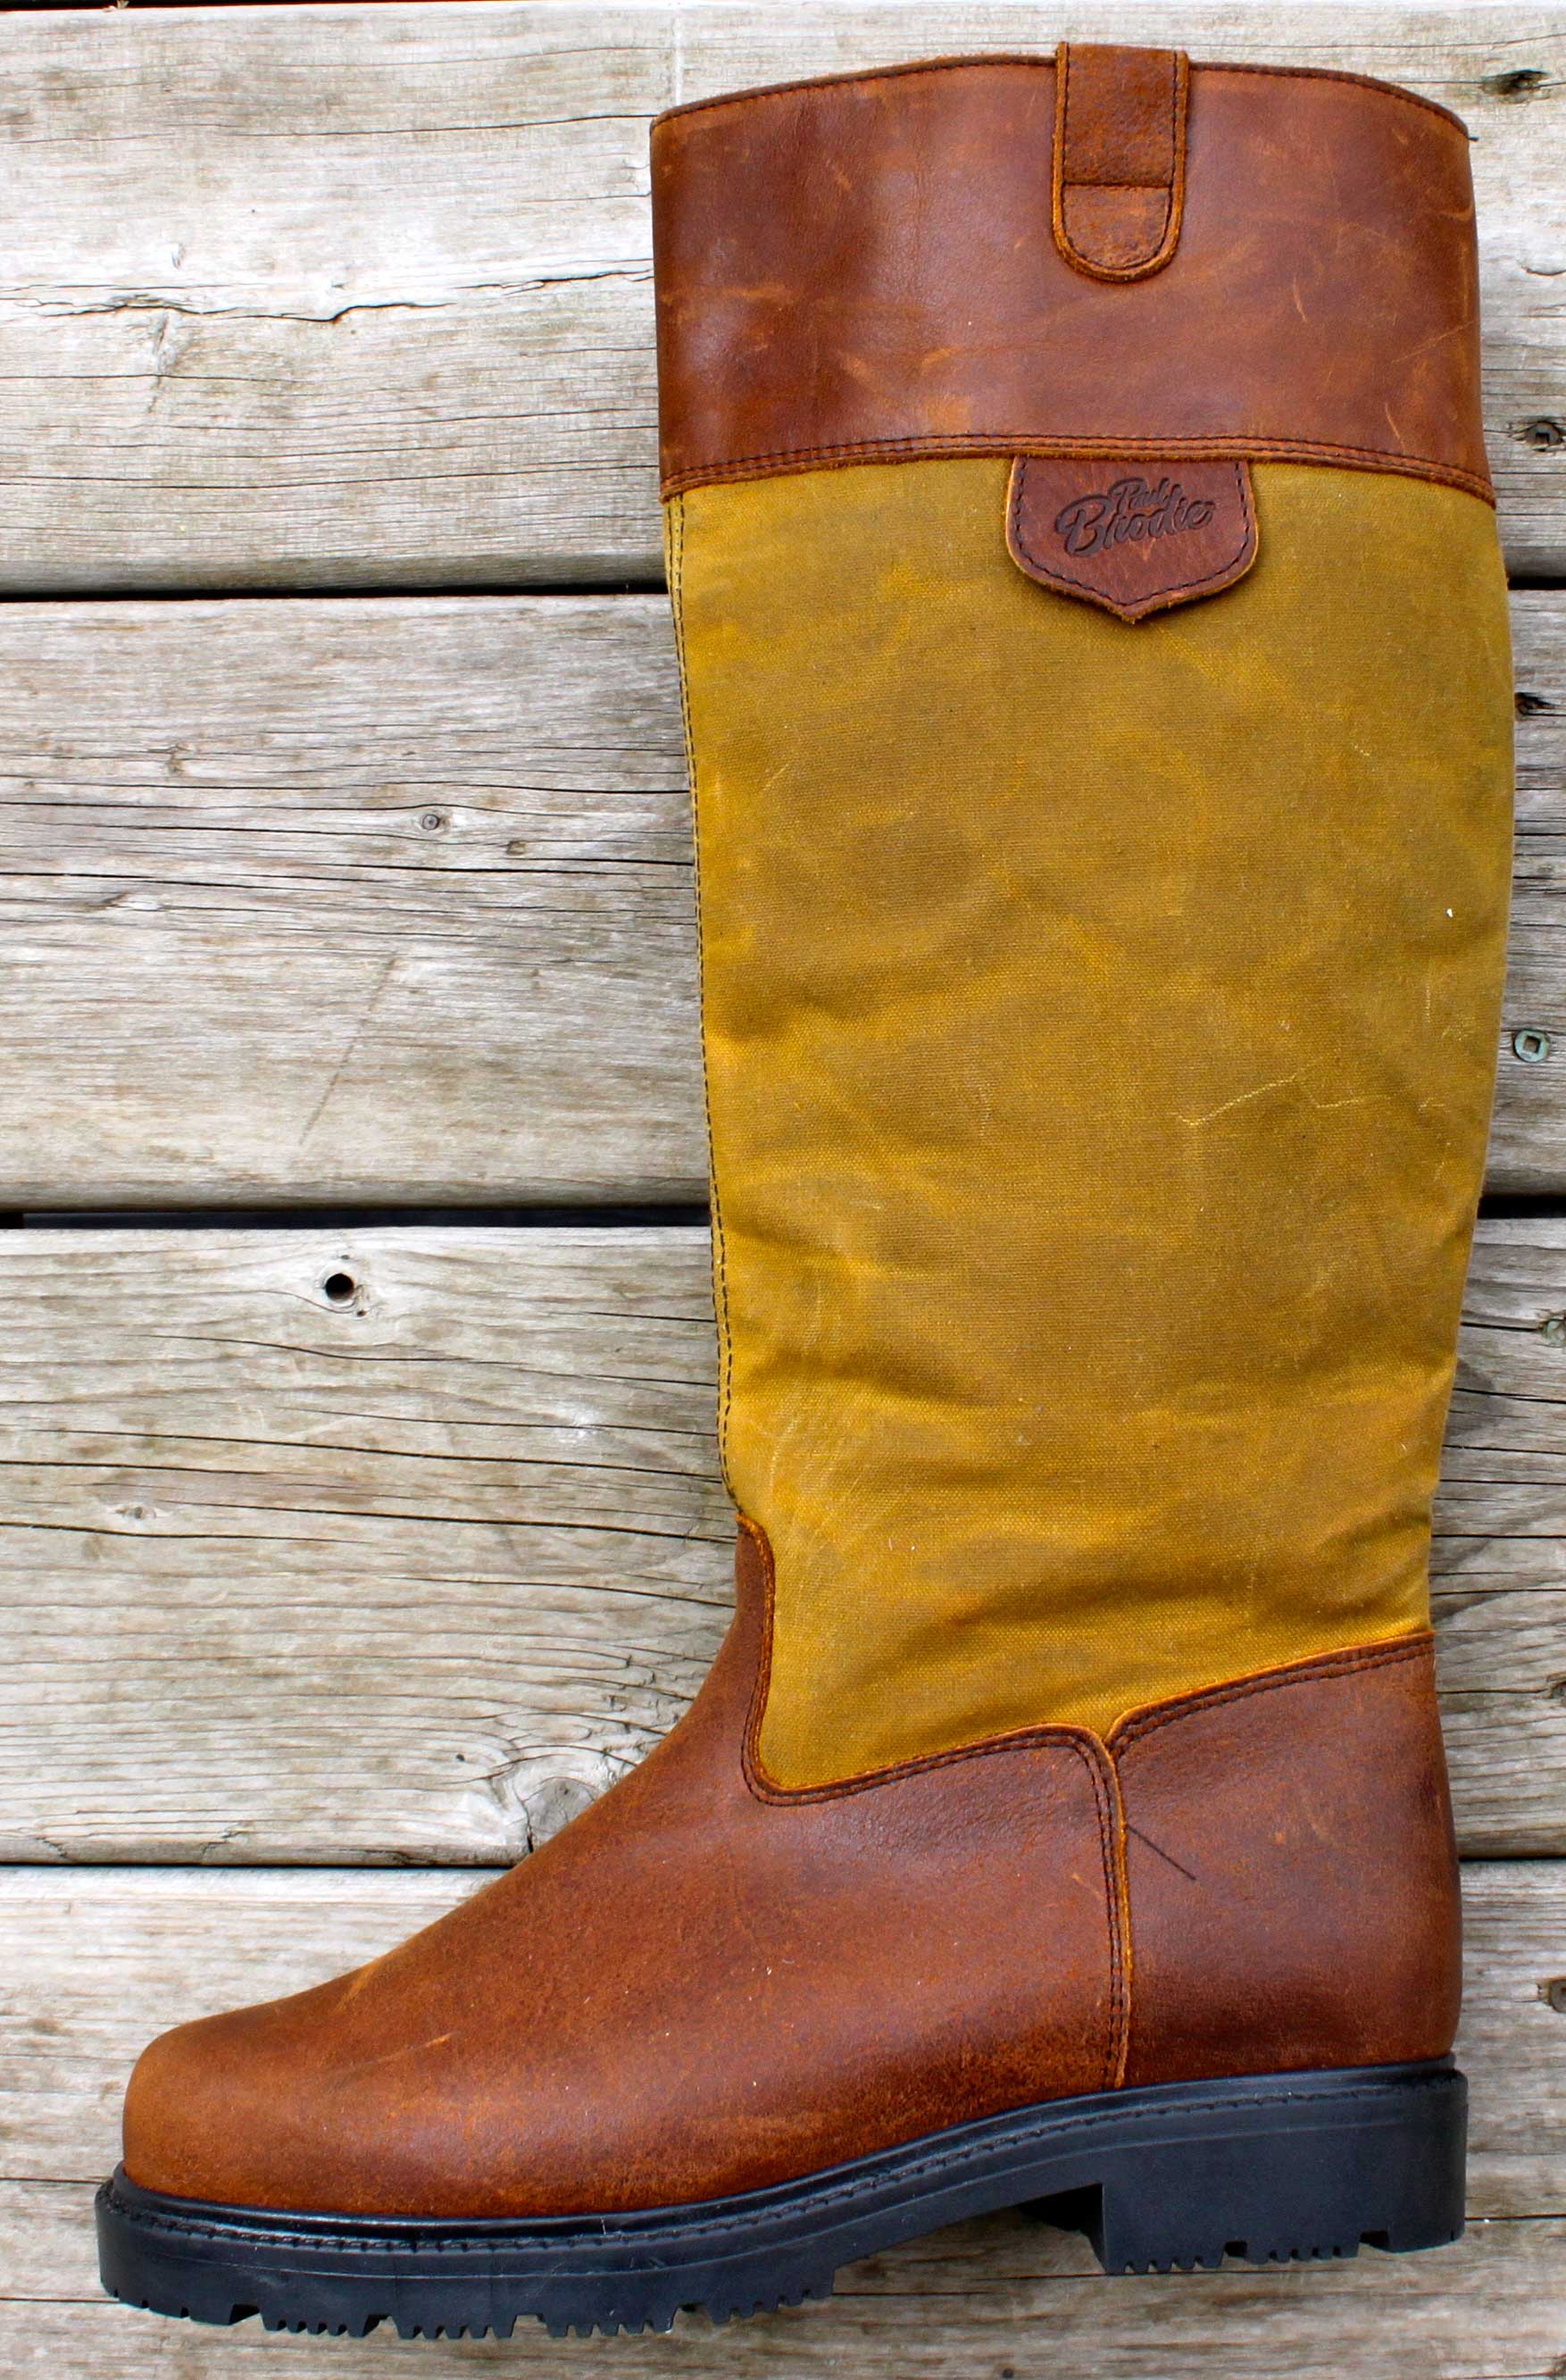 Paul Brodie Tall Pull On Boot - Brown with Whisky Wax Cotton